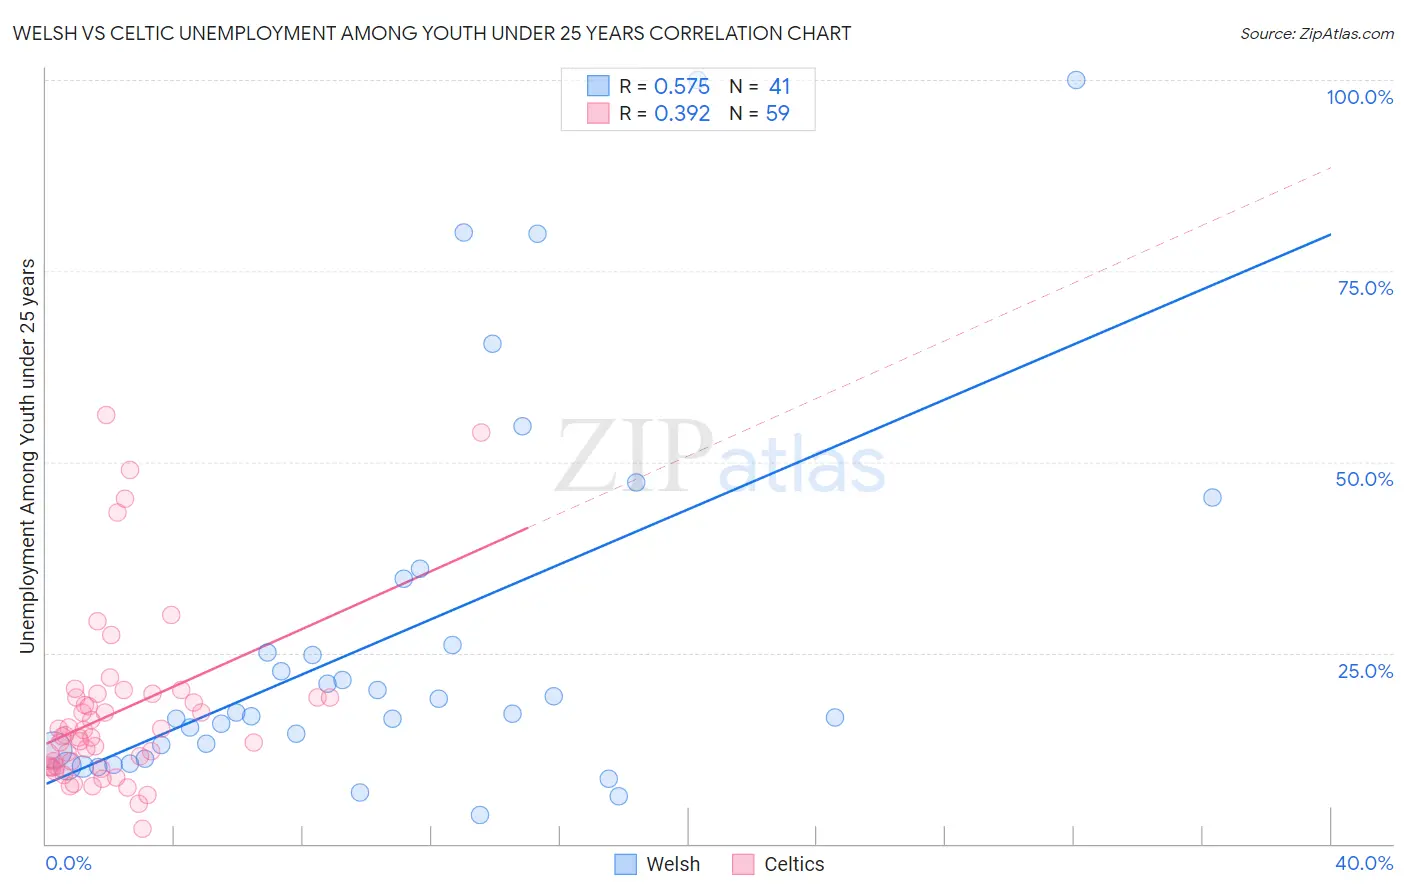 Welsh vs Celtic Unemployment Among Youth under 25 years